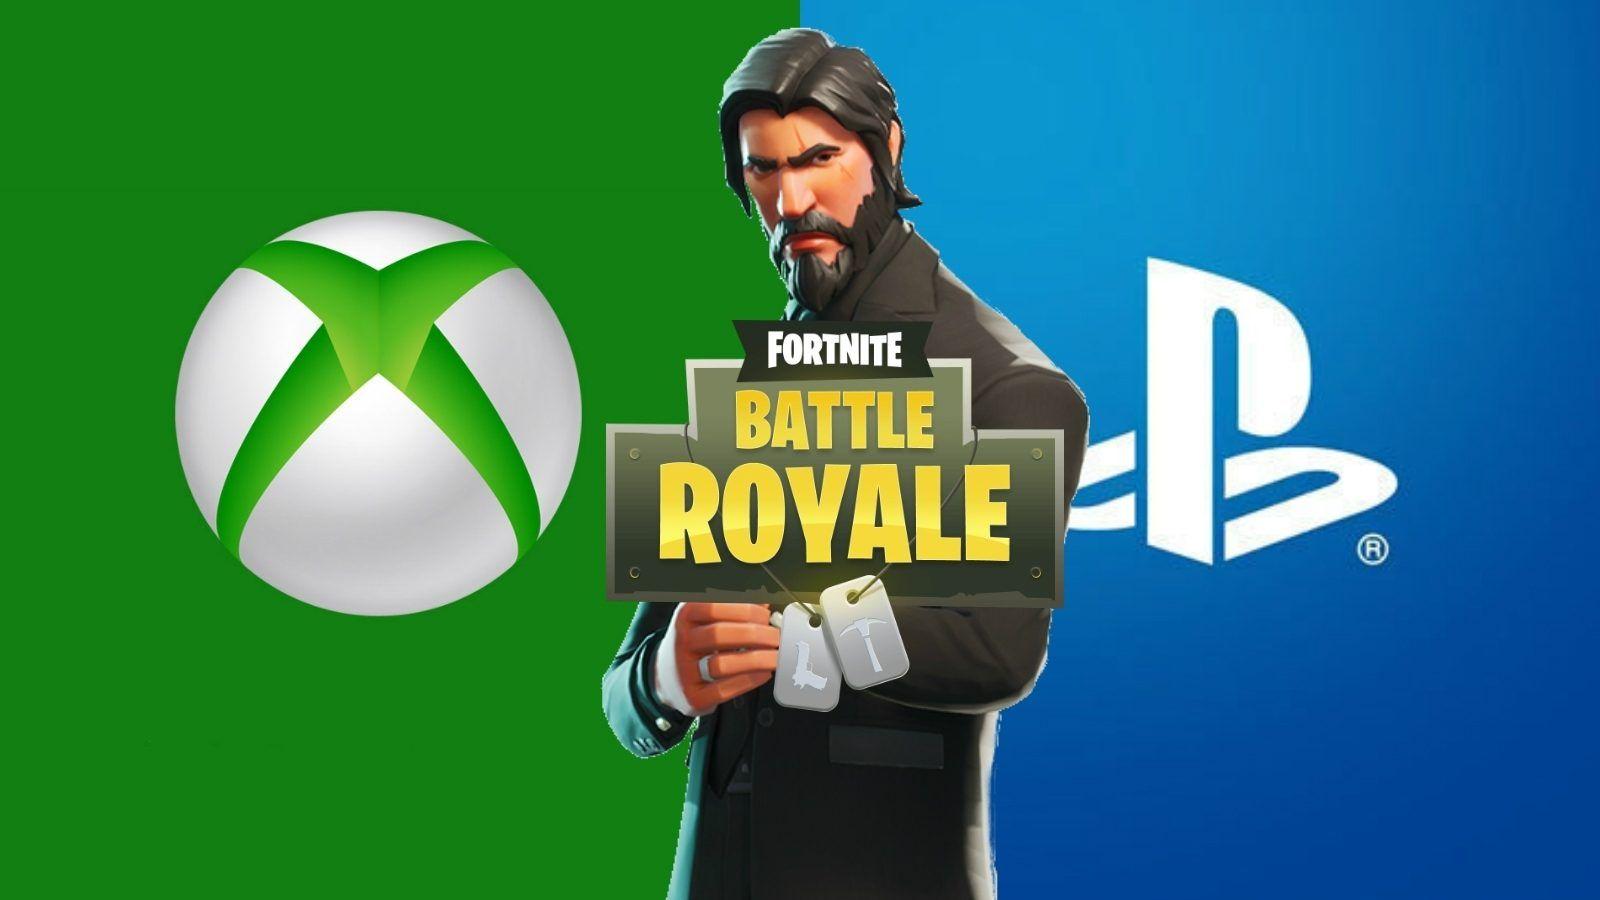 Xbox Fortnite Battle Royale Logo - Console Fortnite Player? How To Link Your Epic Games Account to Xbox ...